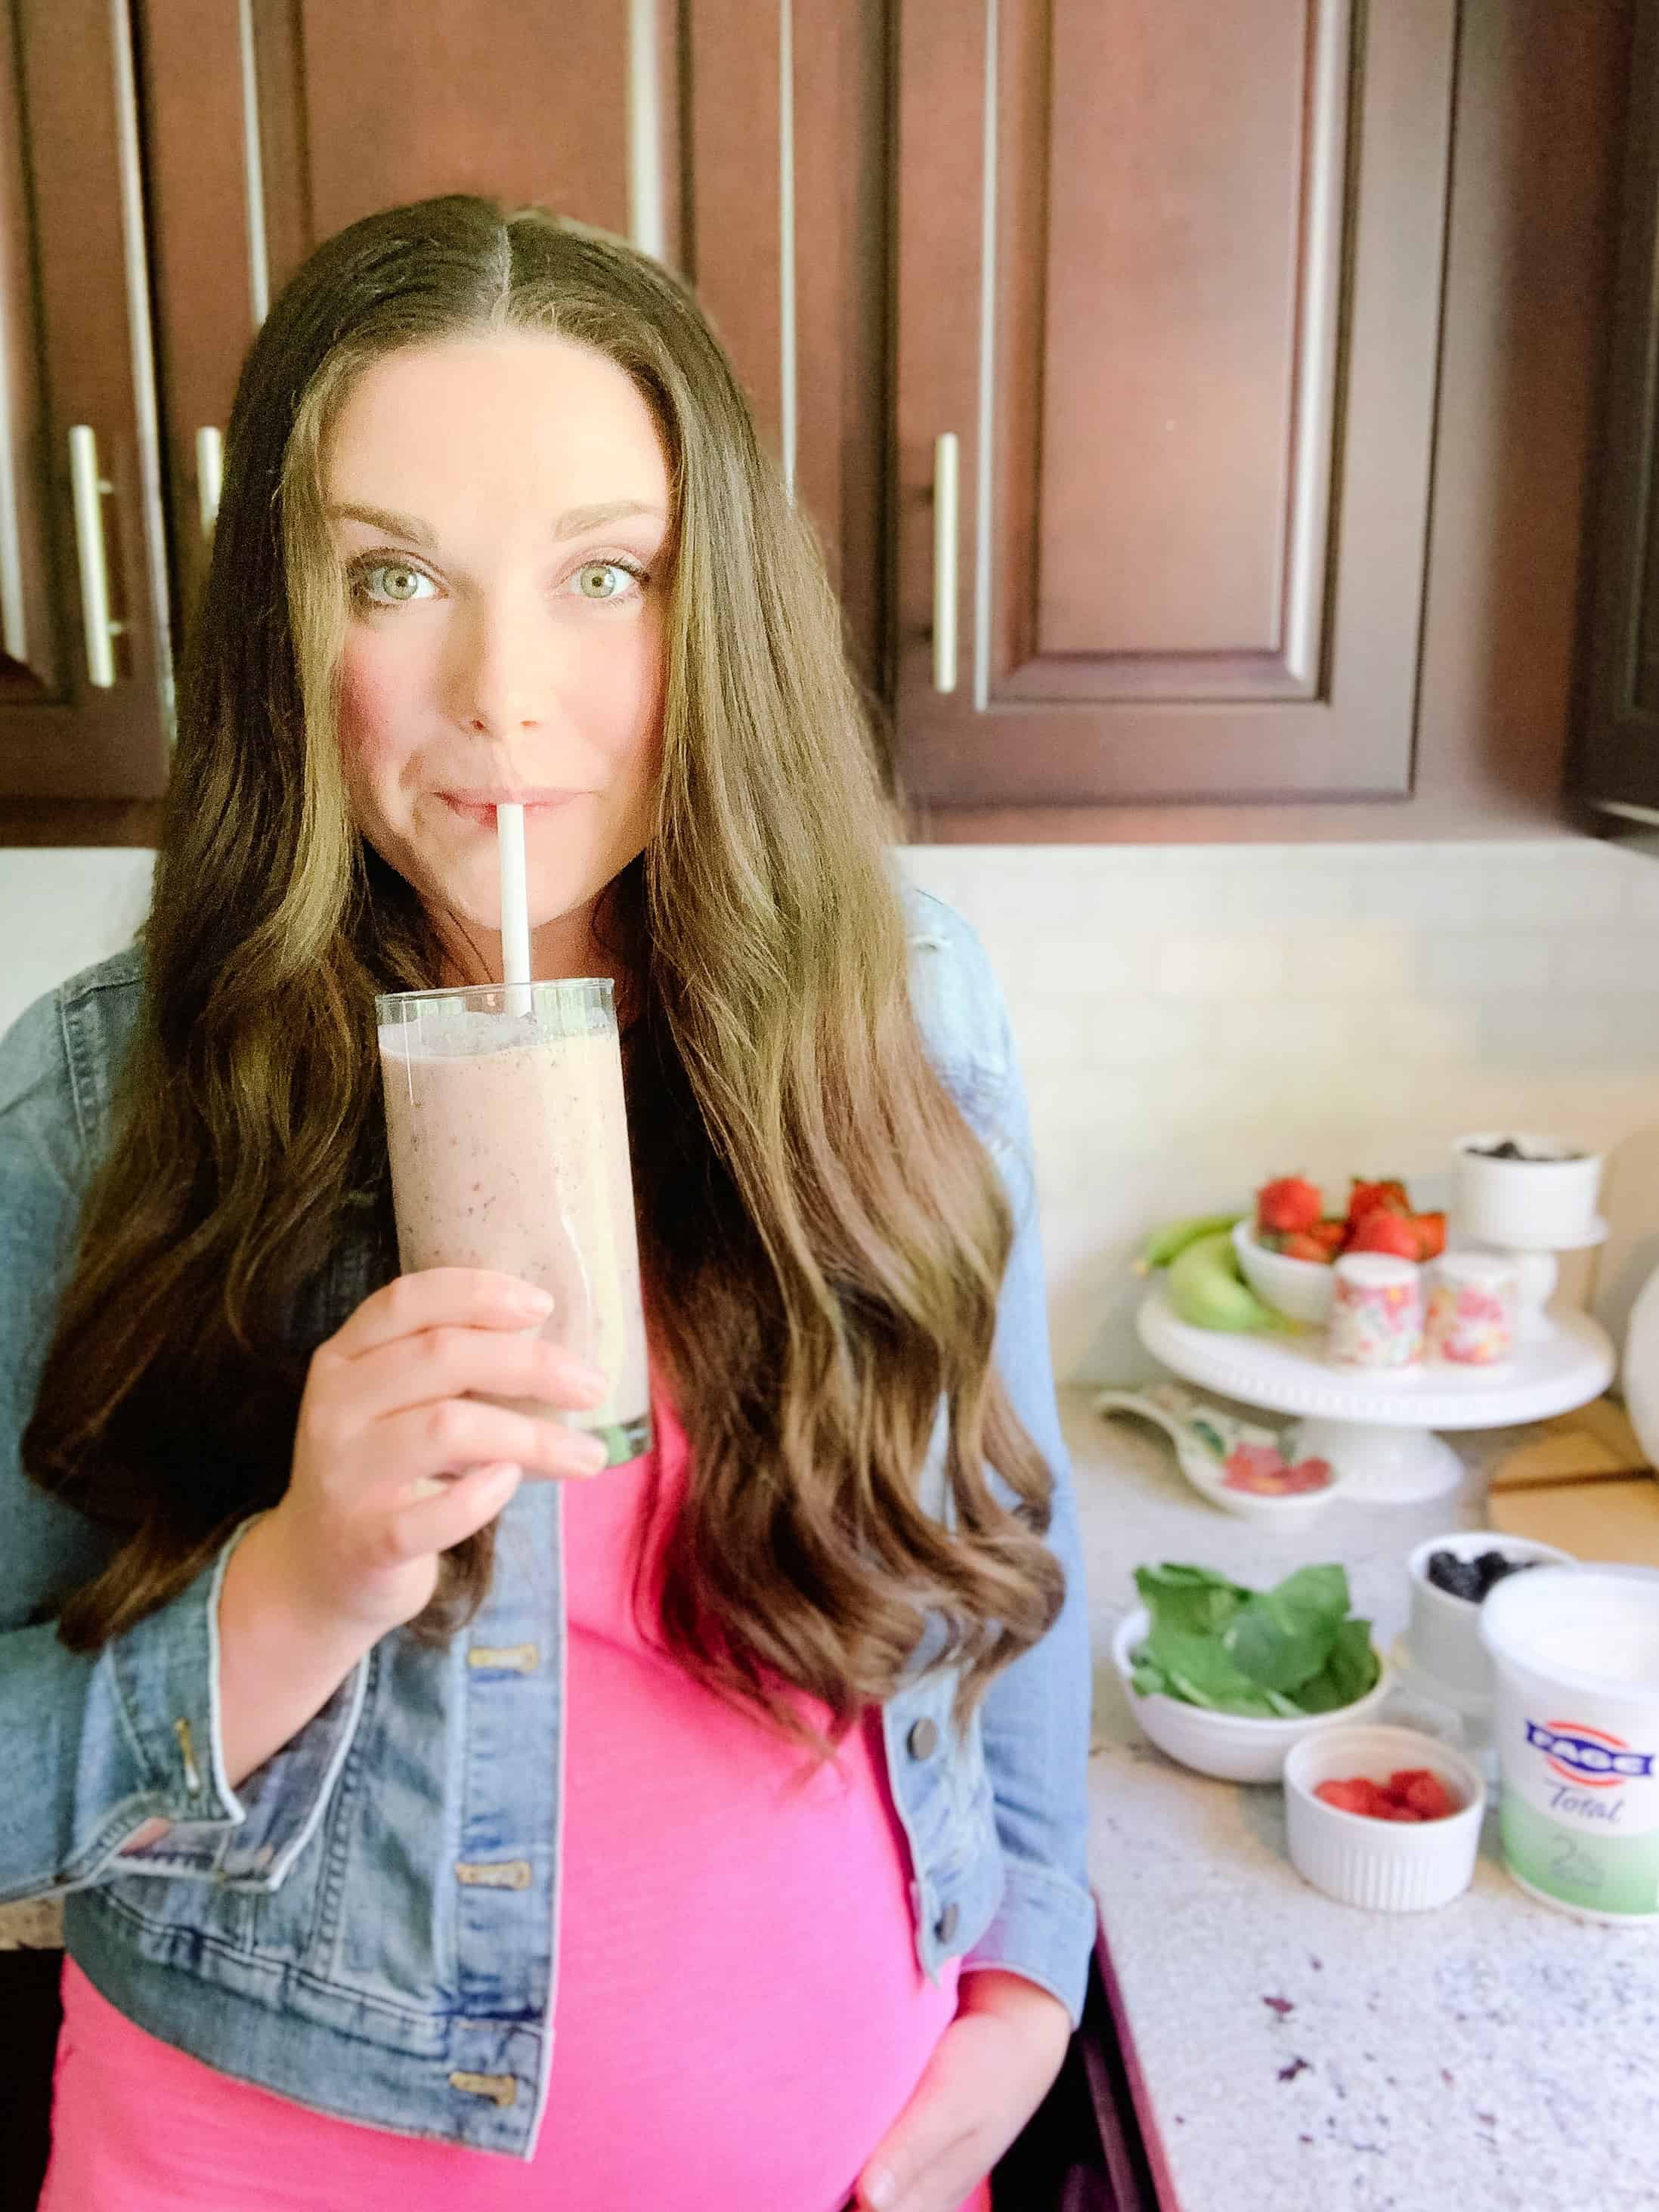 Pregnant woman drinking a smoothie